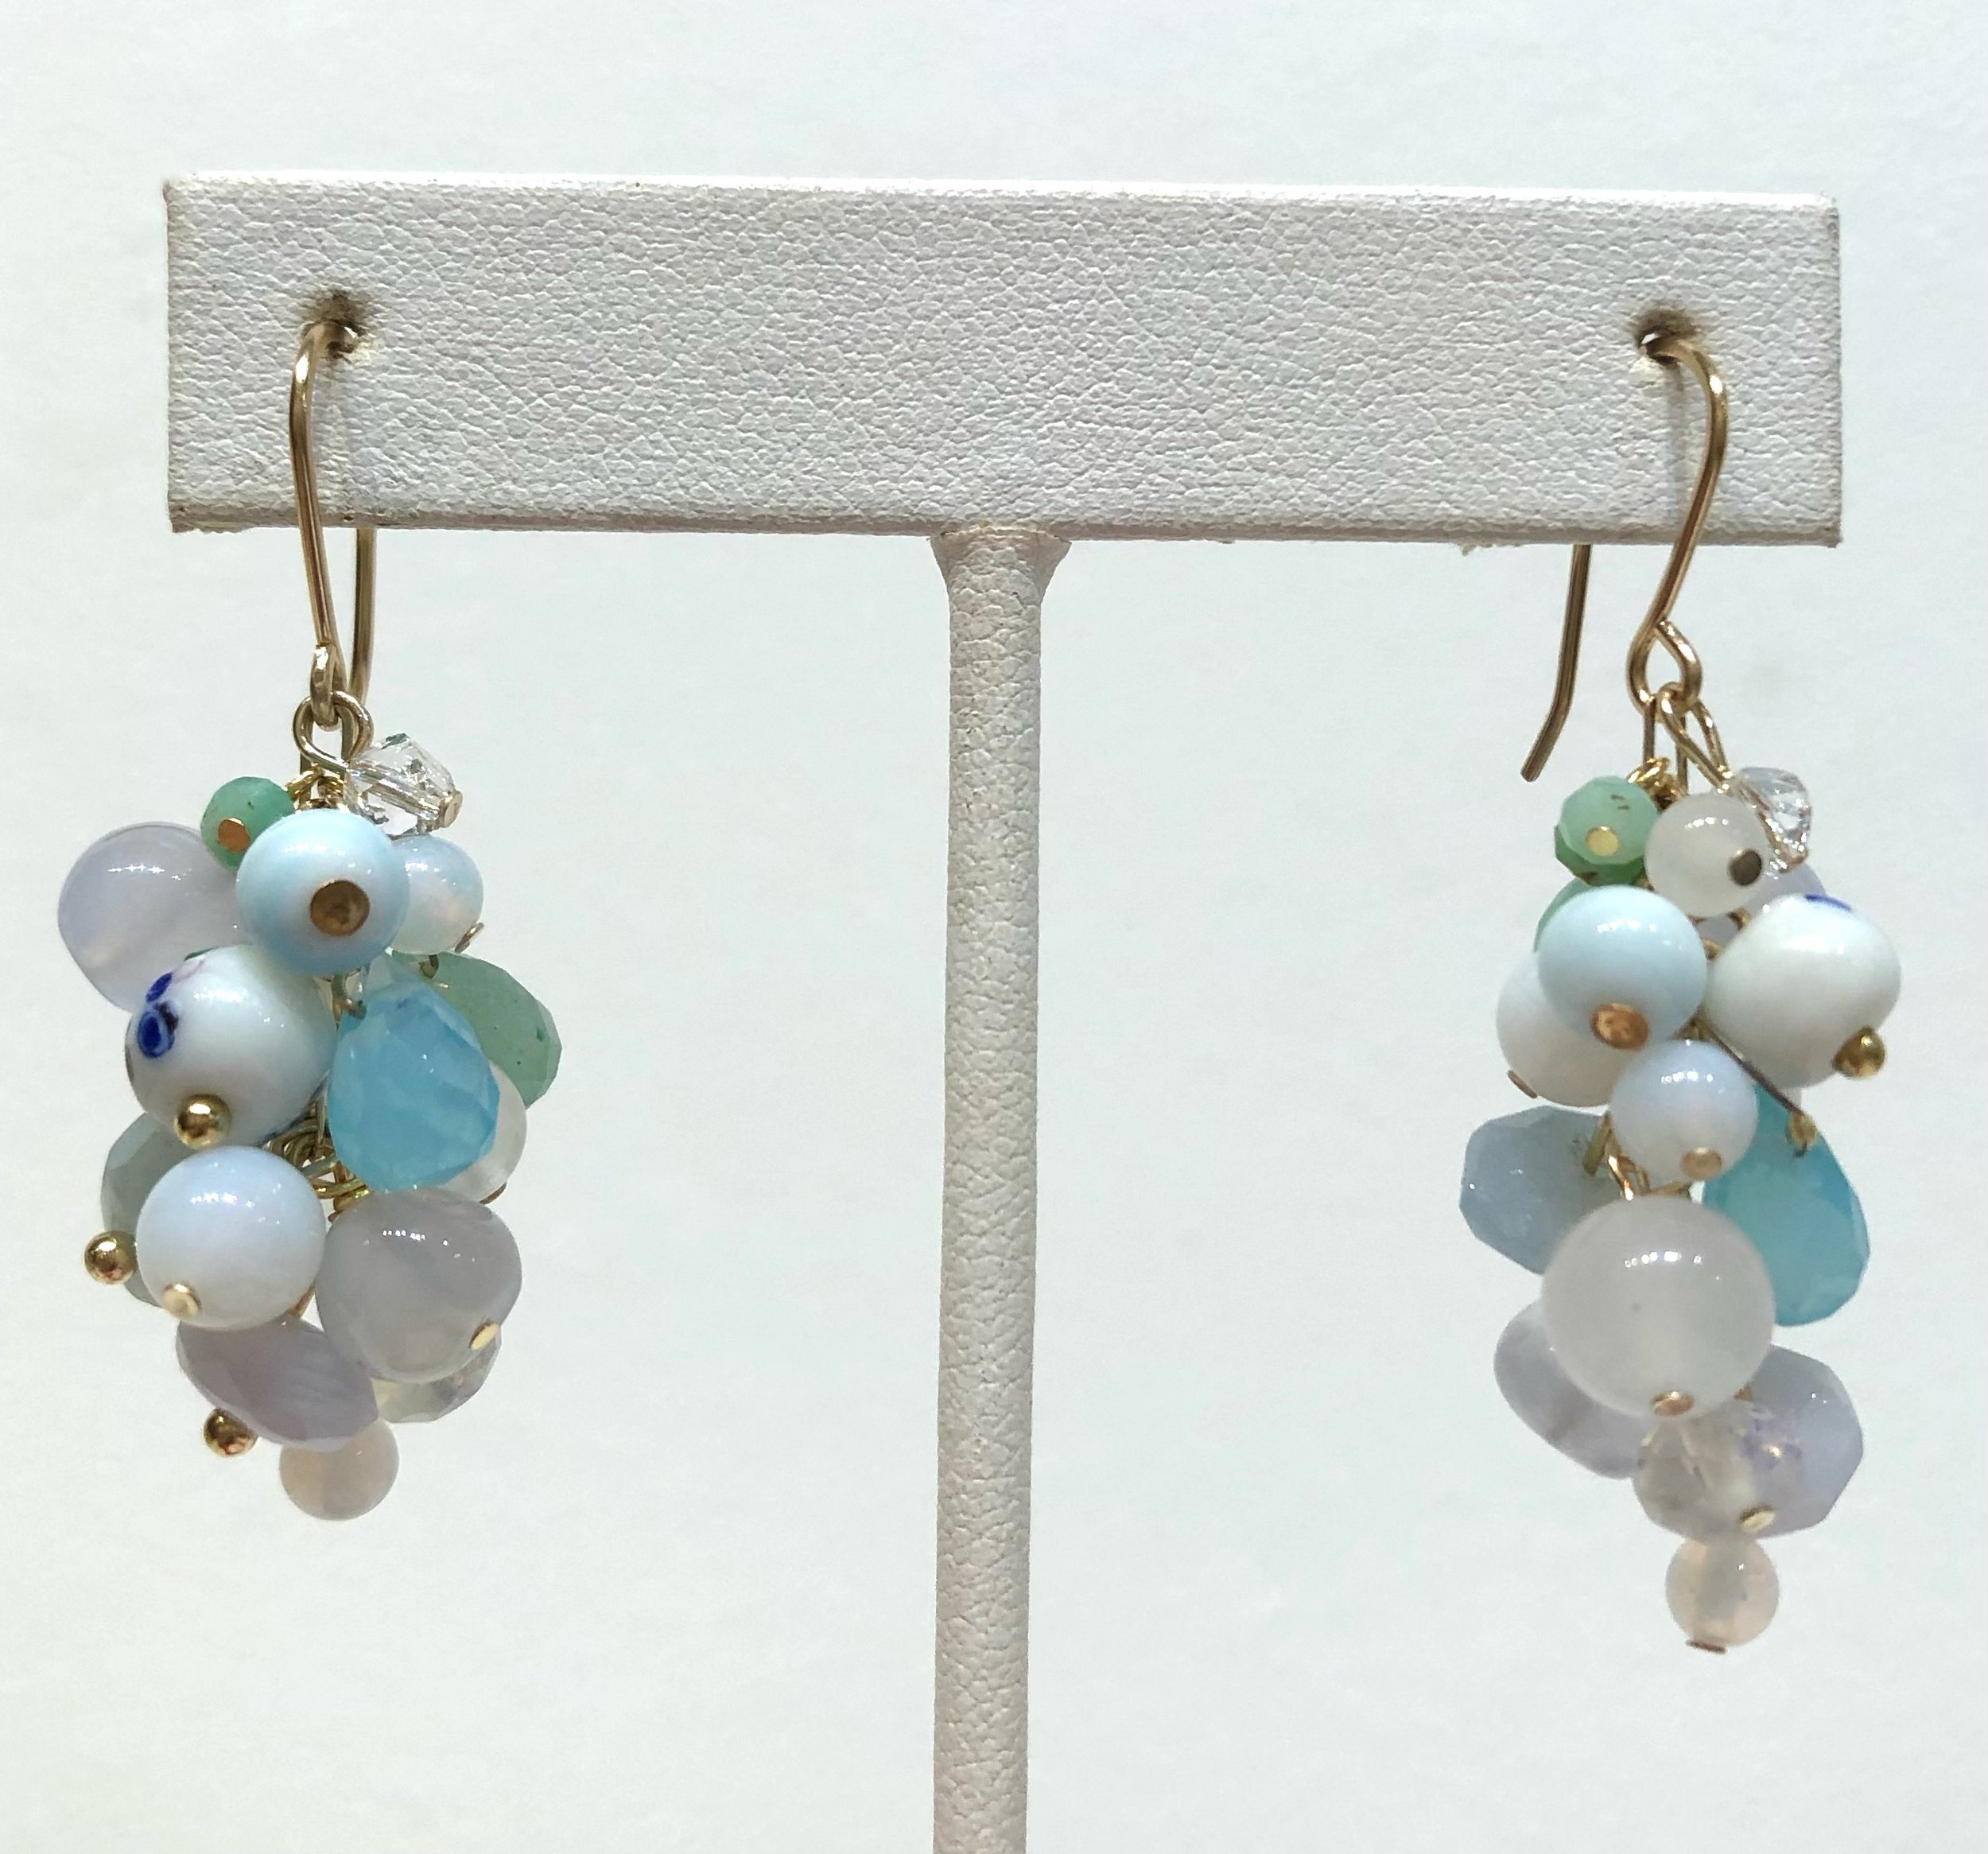  Cluster tonal white rainbow earrings featuring moonstones, rock crystal, chalcedony, green chalcedony, amazonite, antique glass beads, 14k gold fill 